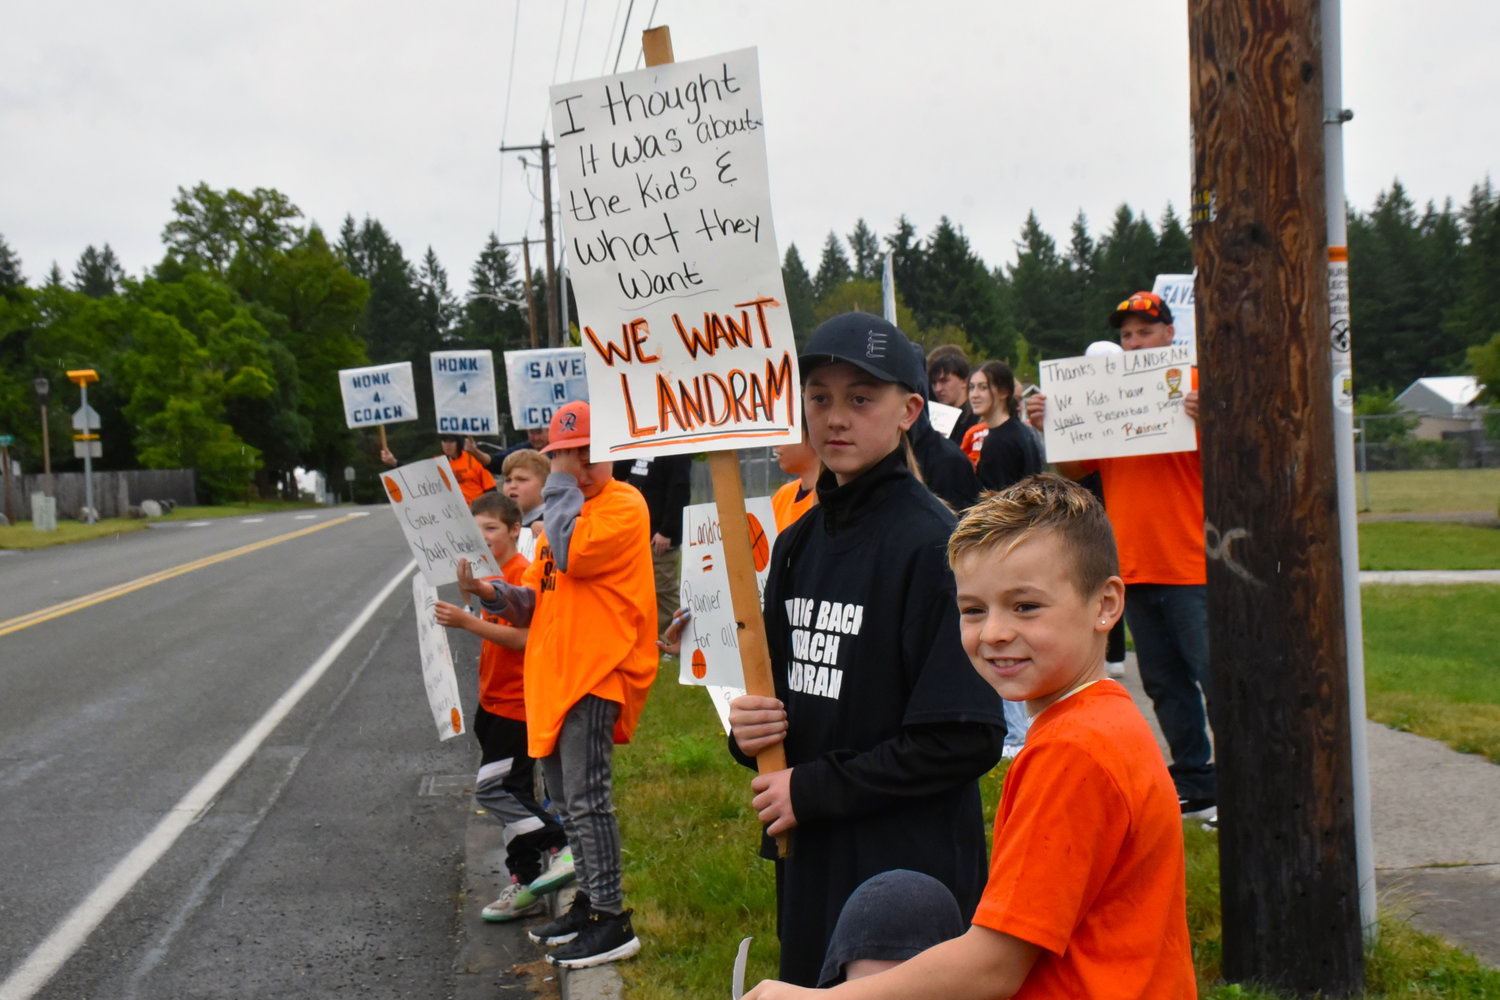 Dozens of citizens protested the Rainier School District’s decision to not renew Jeremy Landram’s coaching contract on Monday, June 14, outside of the district office.